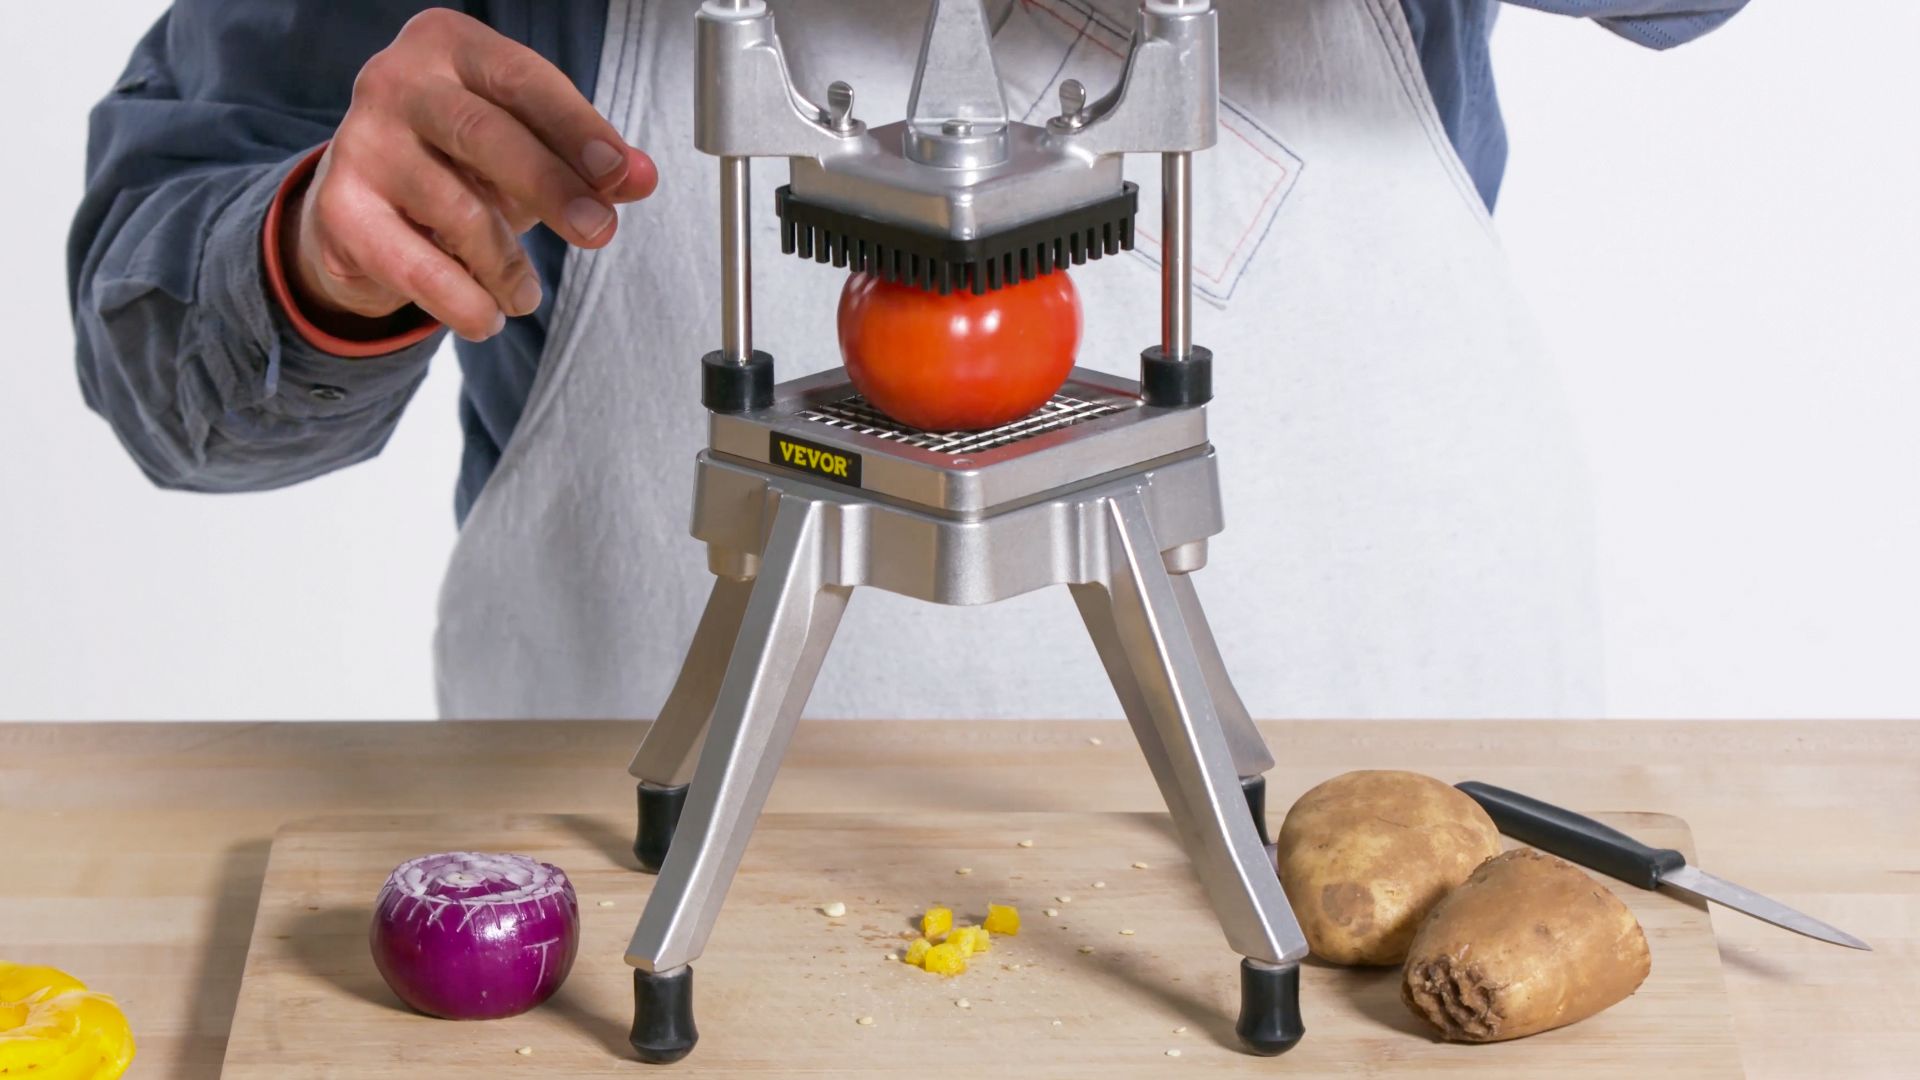 Watch 5 Chopping Kitchen Gadgets Tested by Design Expert